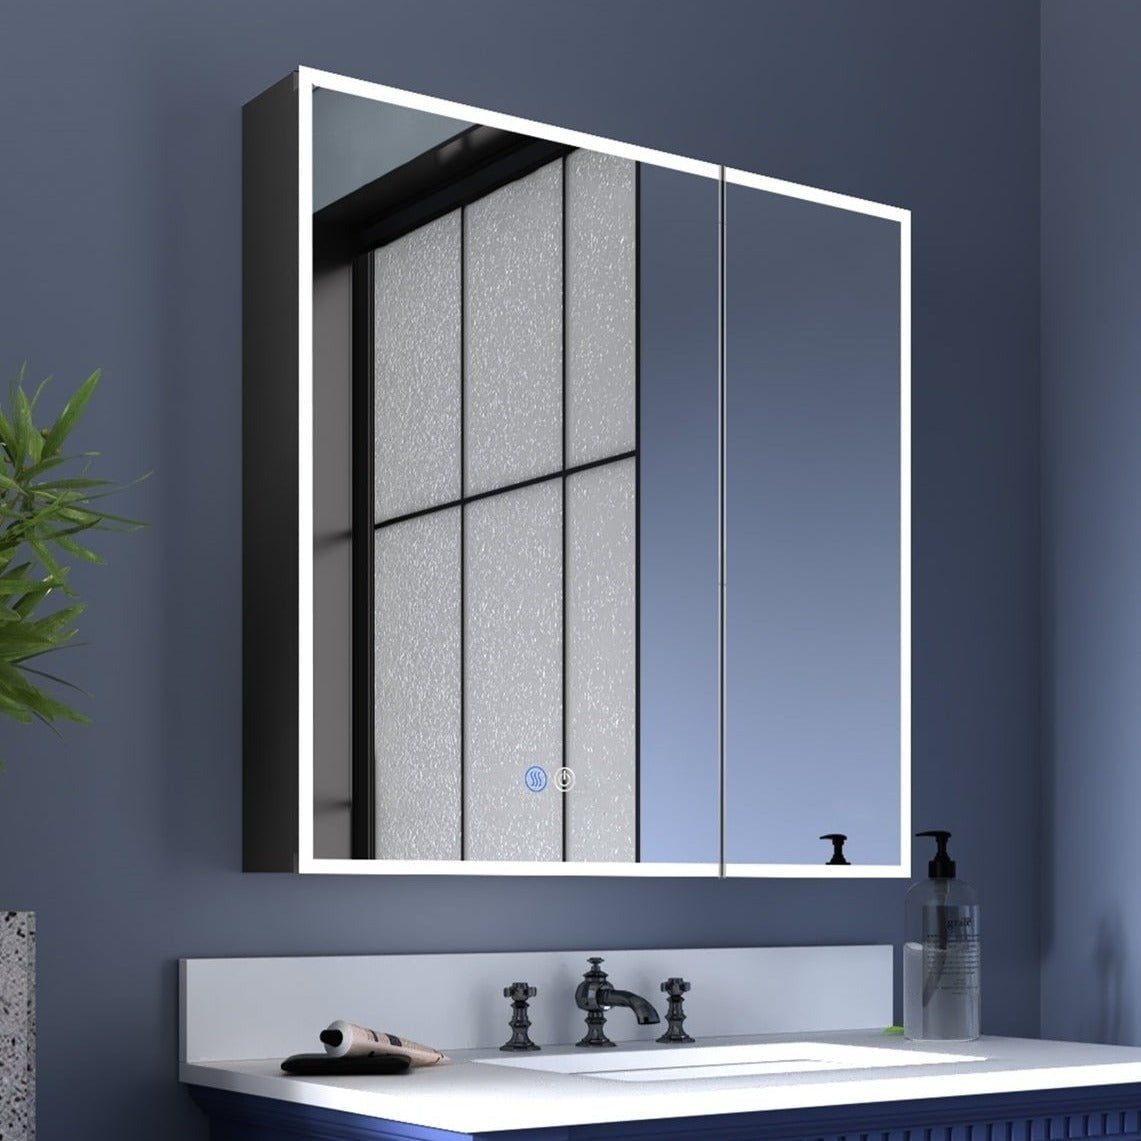 ExBrite 36'' x 32'' LED Lighted Mirror Black Medicine Cabinet with Shelves for Bathroom Recessed or Surface Mount - 36'' x 32